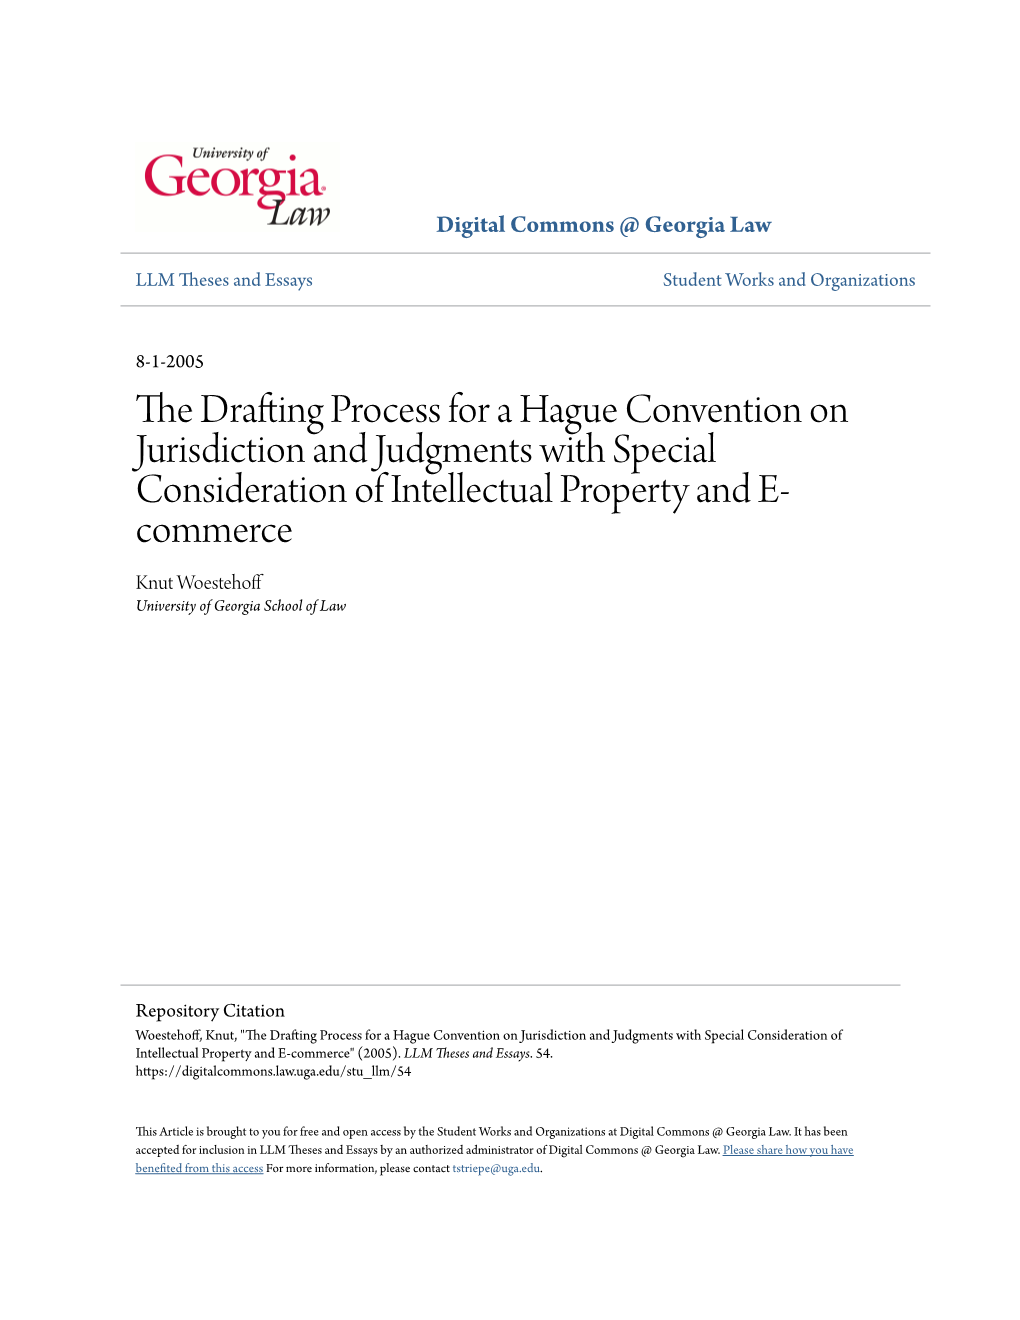 The Drafting Process for a Hague Convention on Jurisdiction And